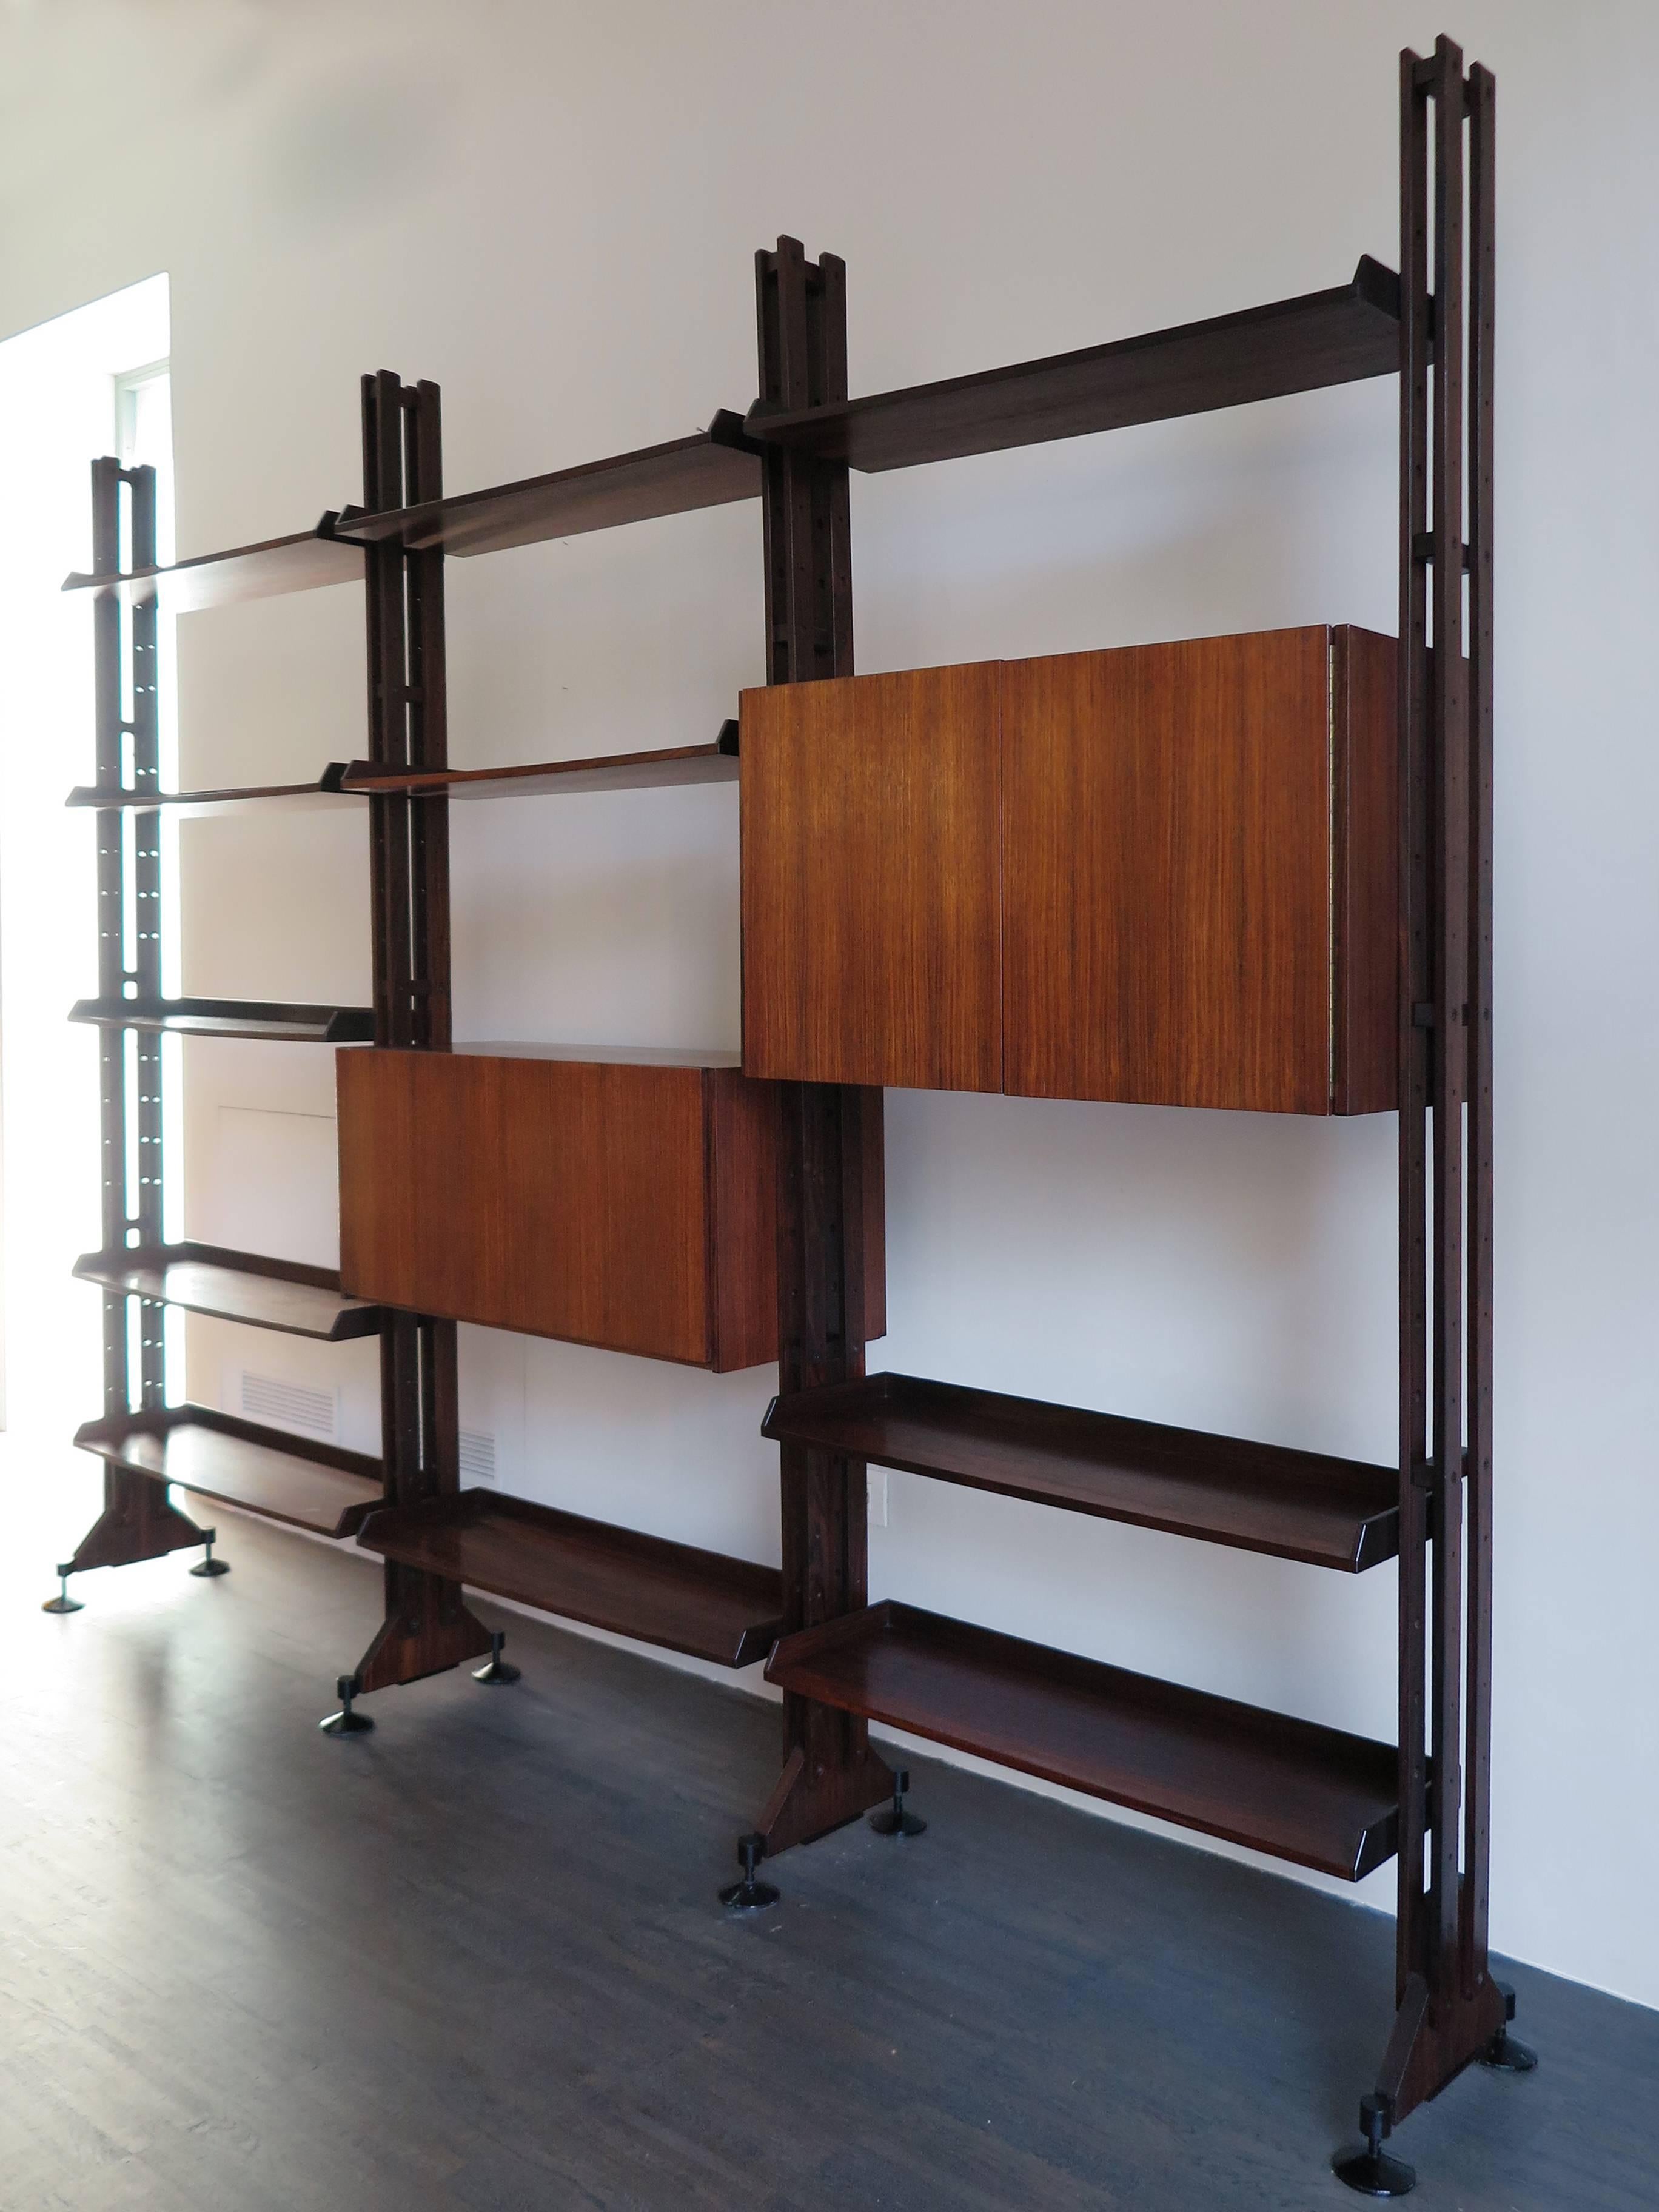 Very rare Italian rosewood bookcase model LB10 designed by Franco Albini and manufactured by Poggi in 1958, Mid-Century Modern design.
Library shelves, adjustable.
Uprights, containers and shelves made of rosewood, foot made of metal.
Museum of